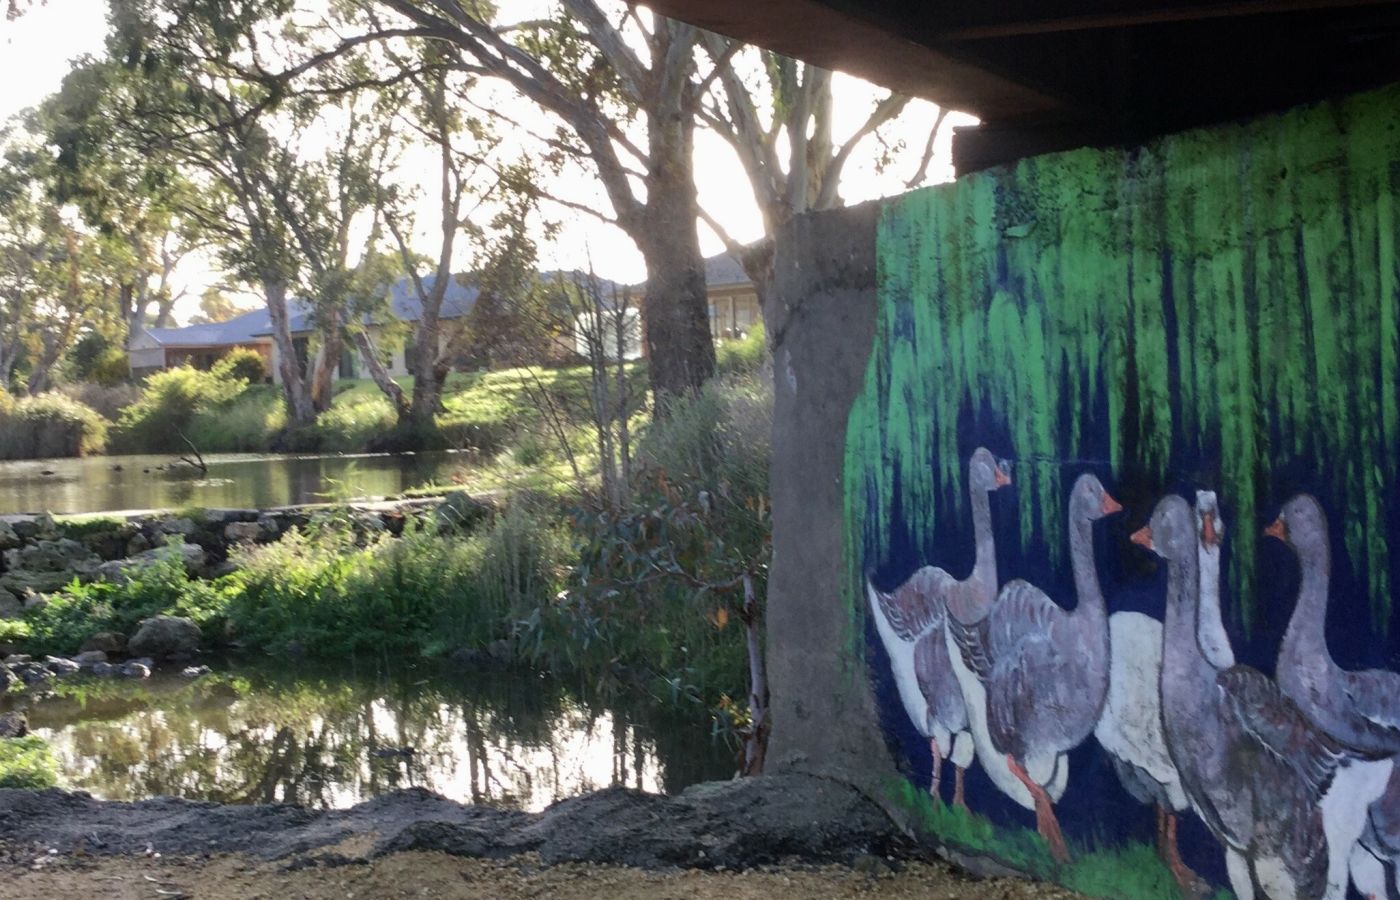 Pest control in Naracoorte Lucindale Council areas - Painted mural at Naracoorte caves